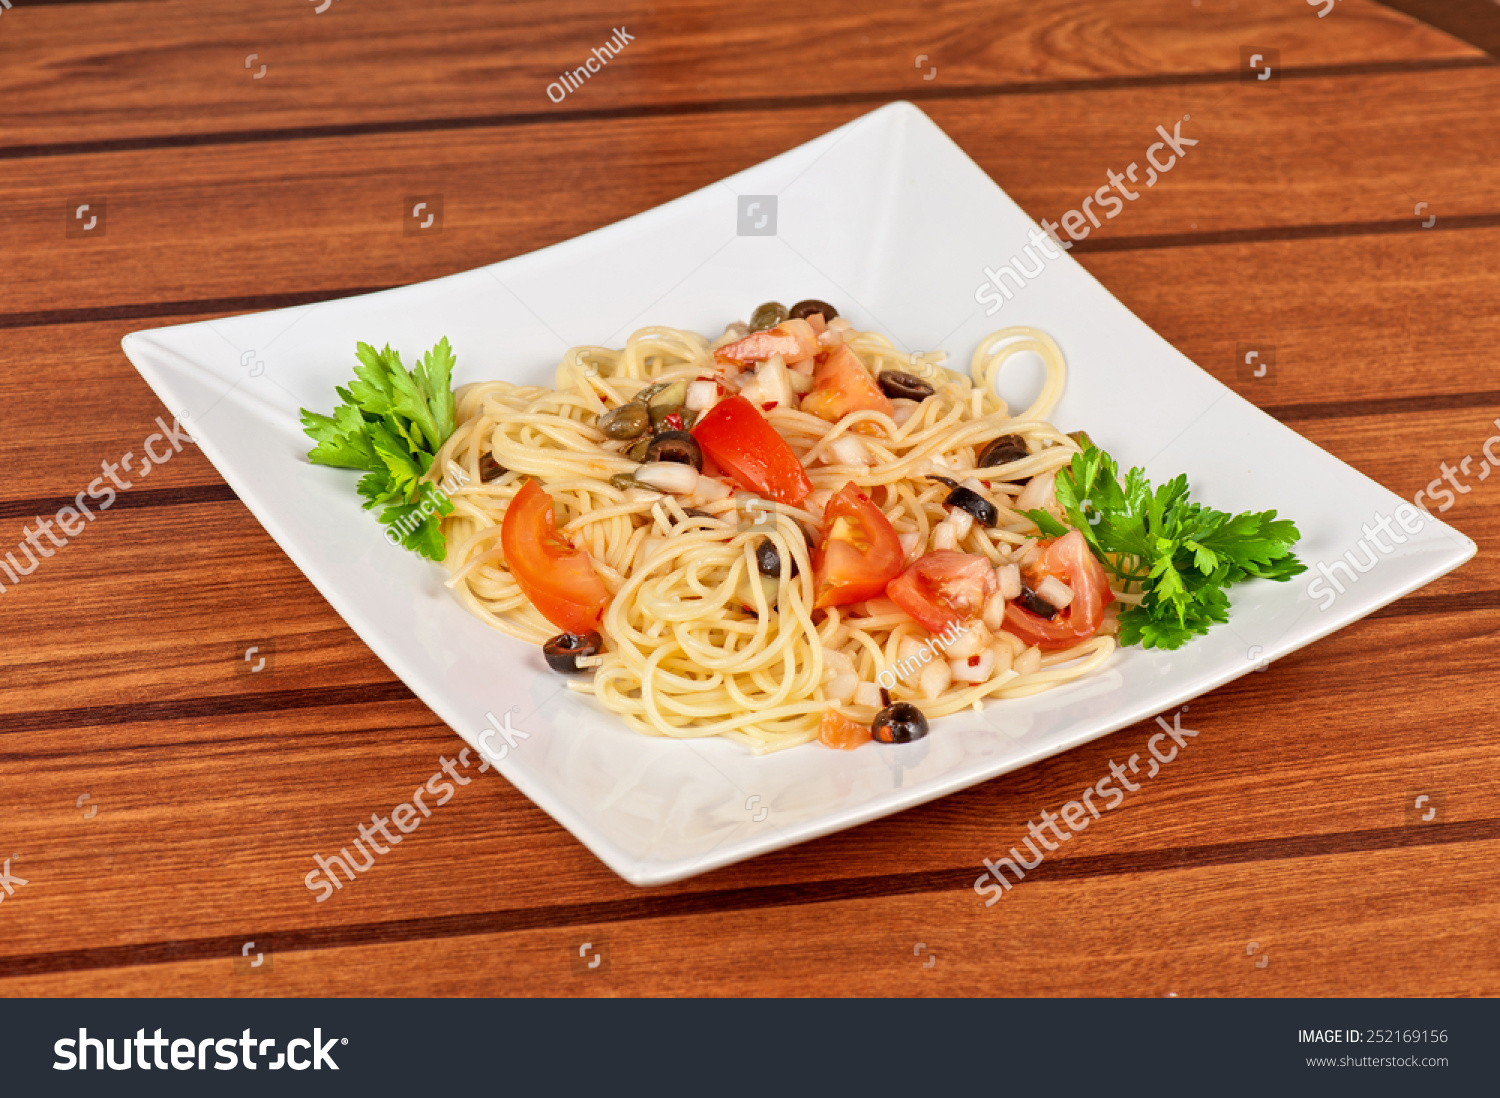 Pasta with tomato, black olives, capers and greens #252169156